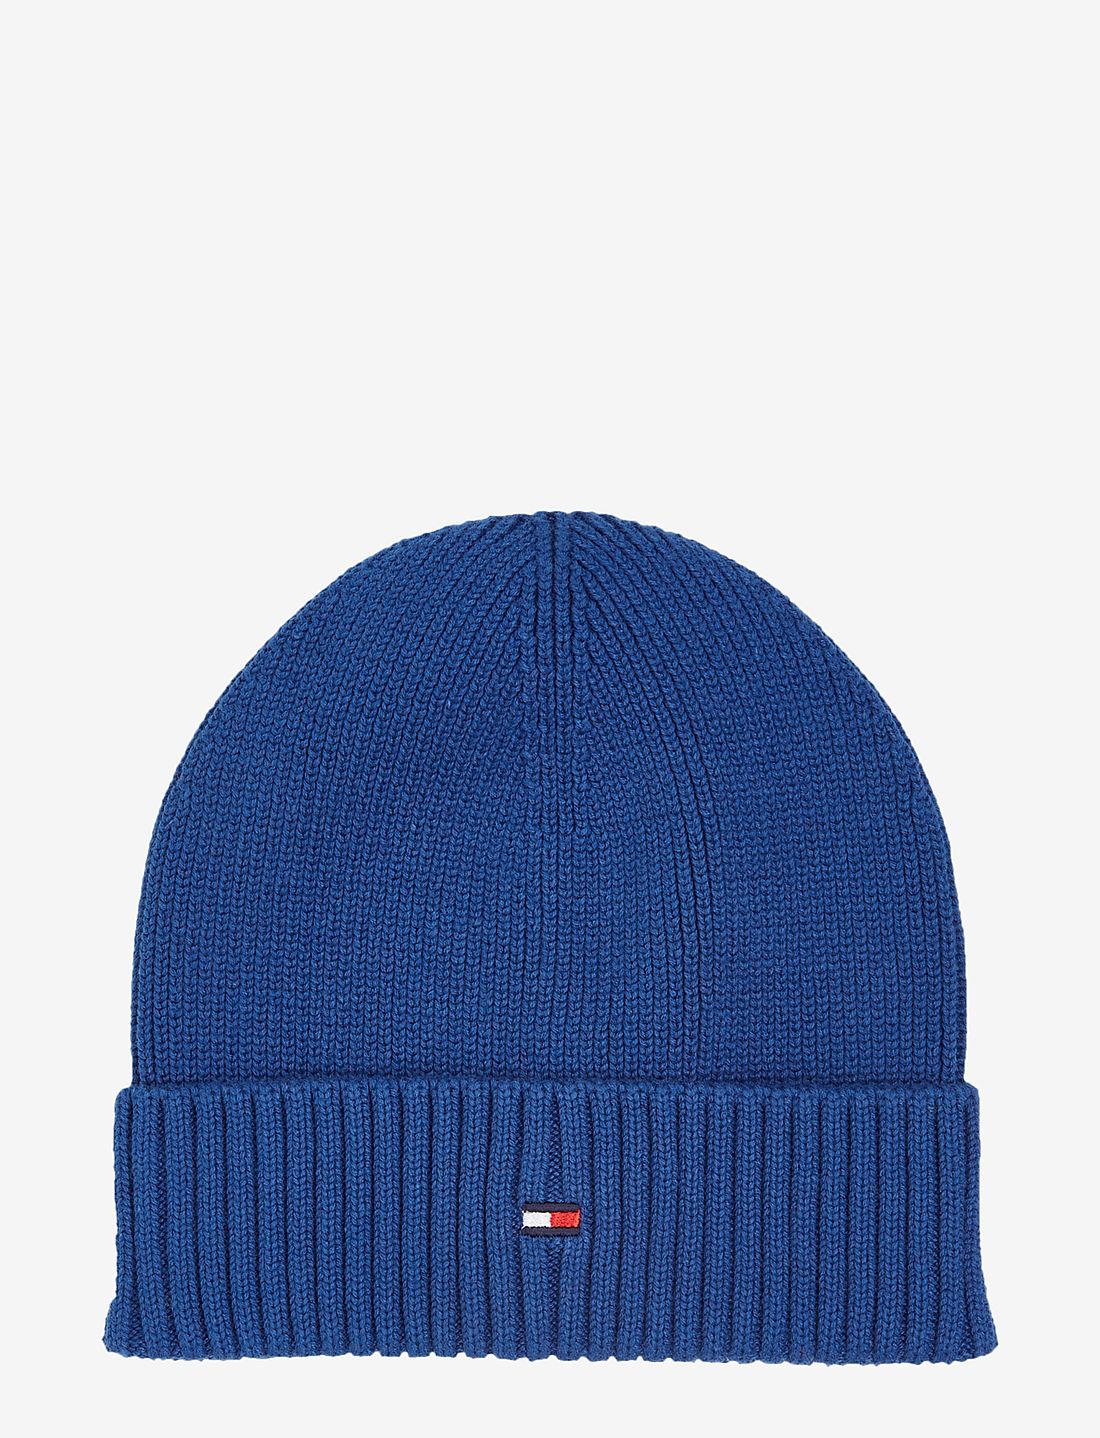 Tommy Hilfiger Small Flag Beanie - Hats